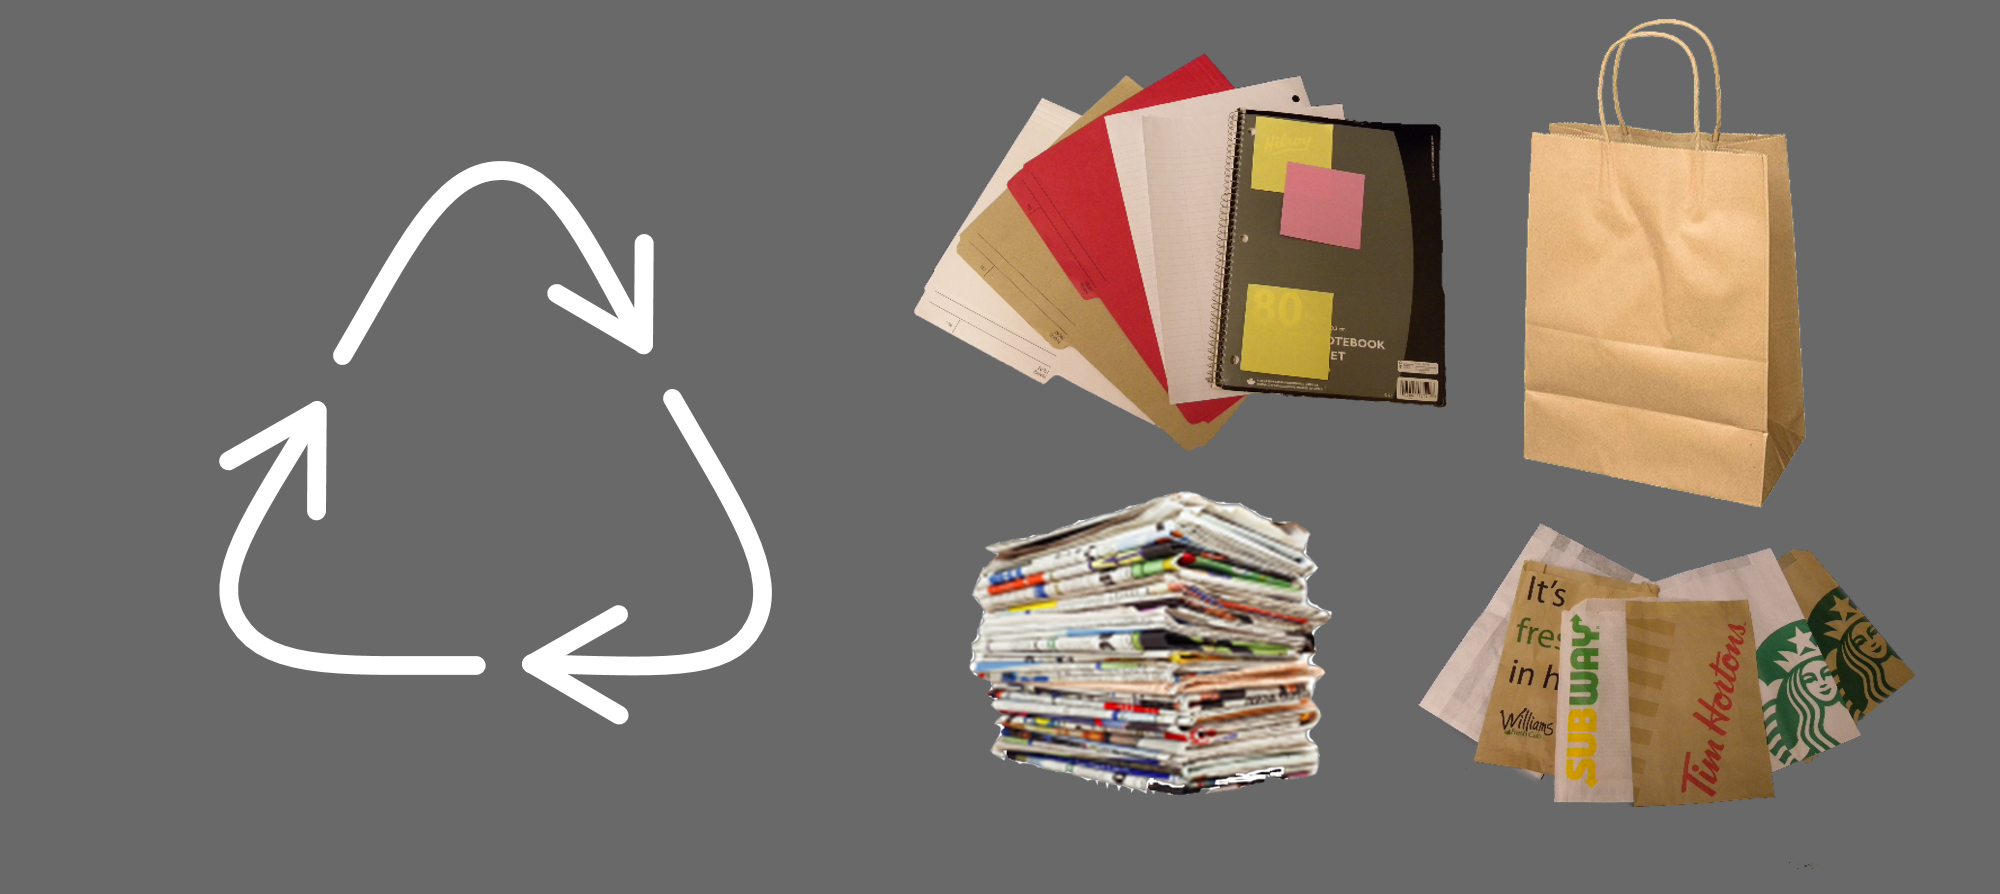 Recycling icon and various items which go in papers.